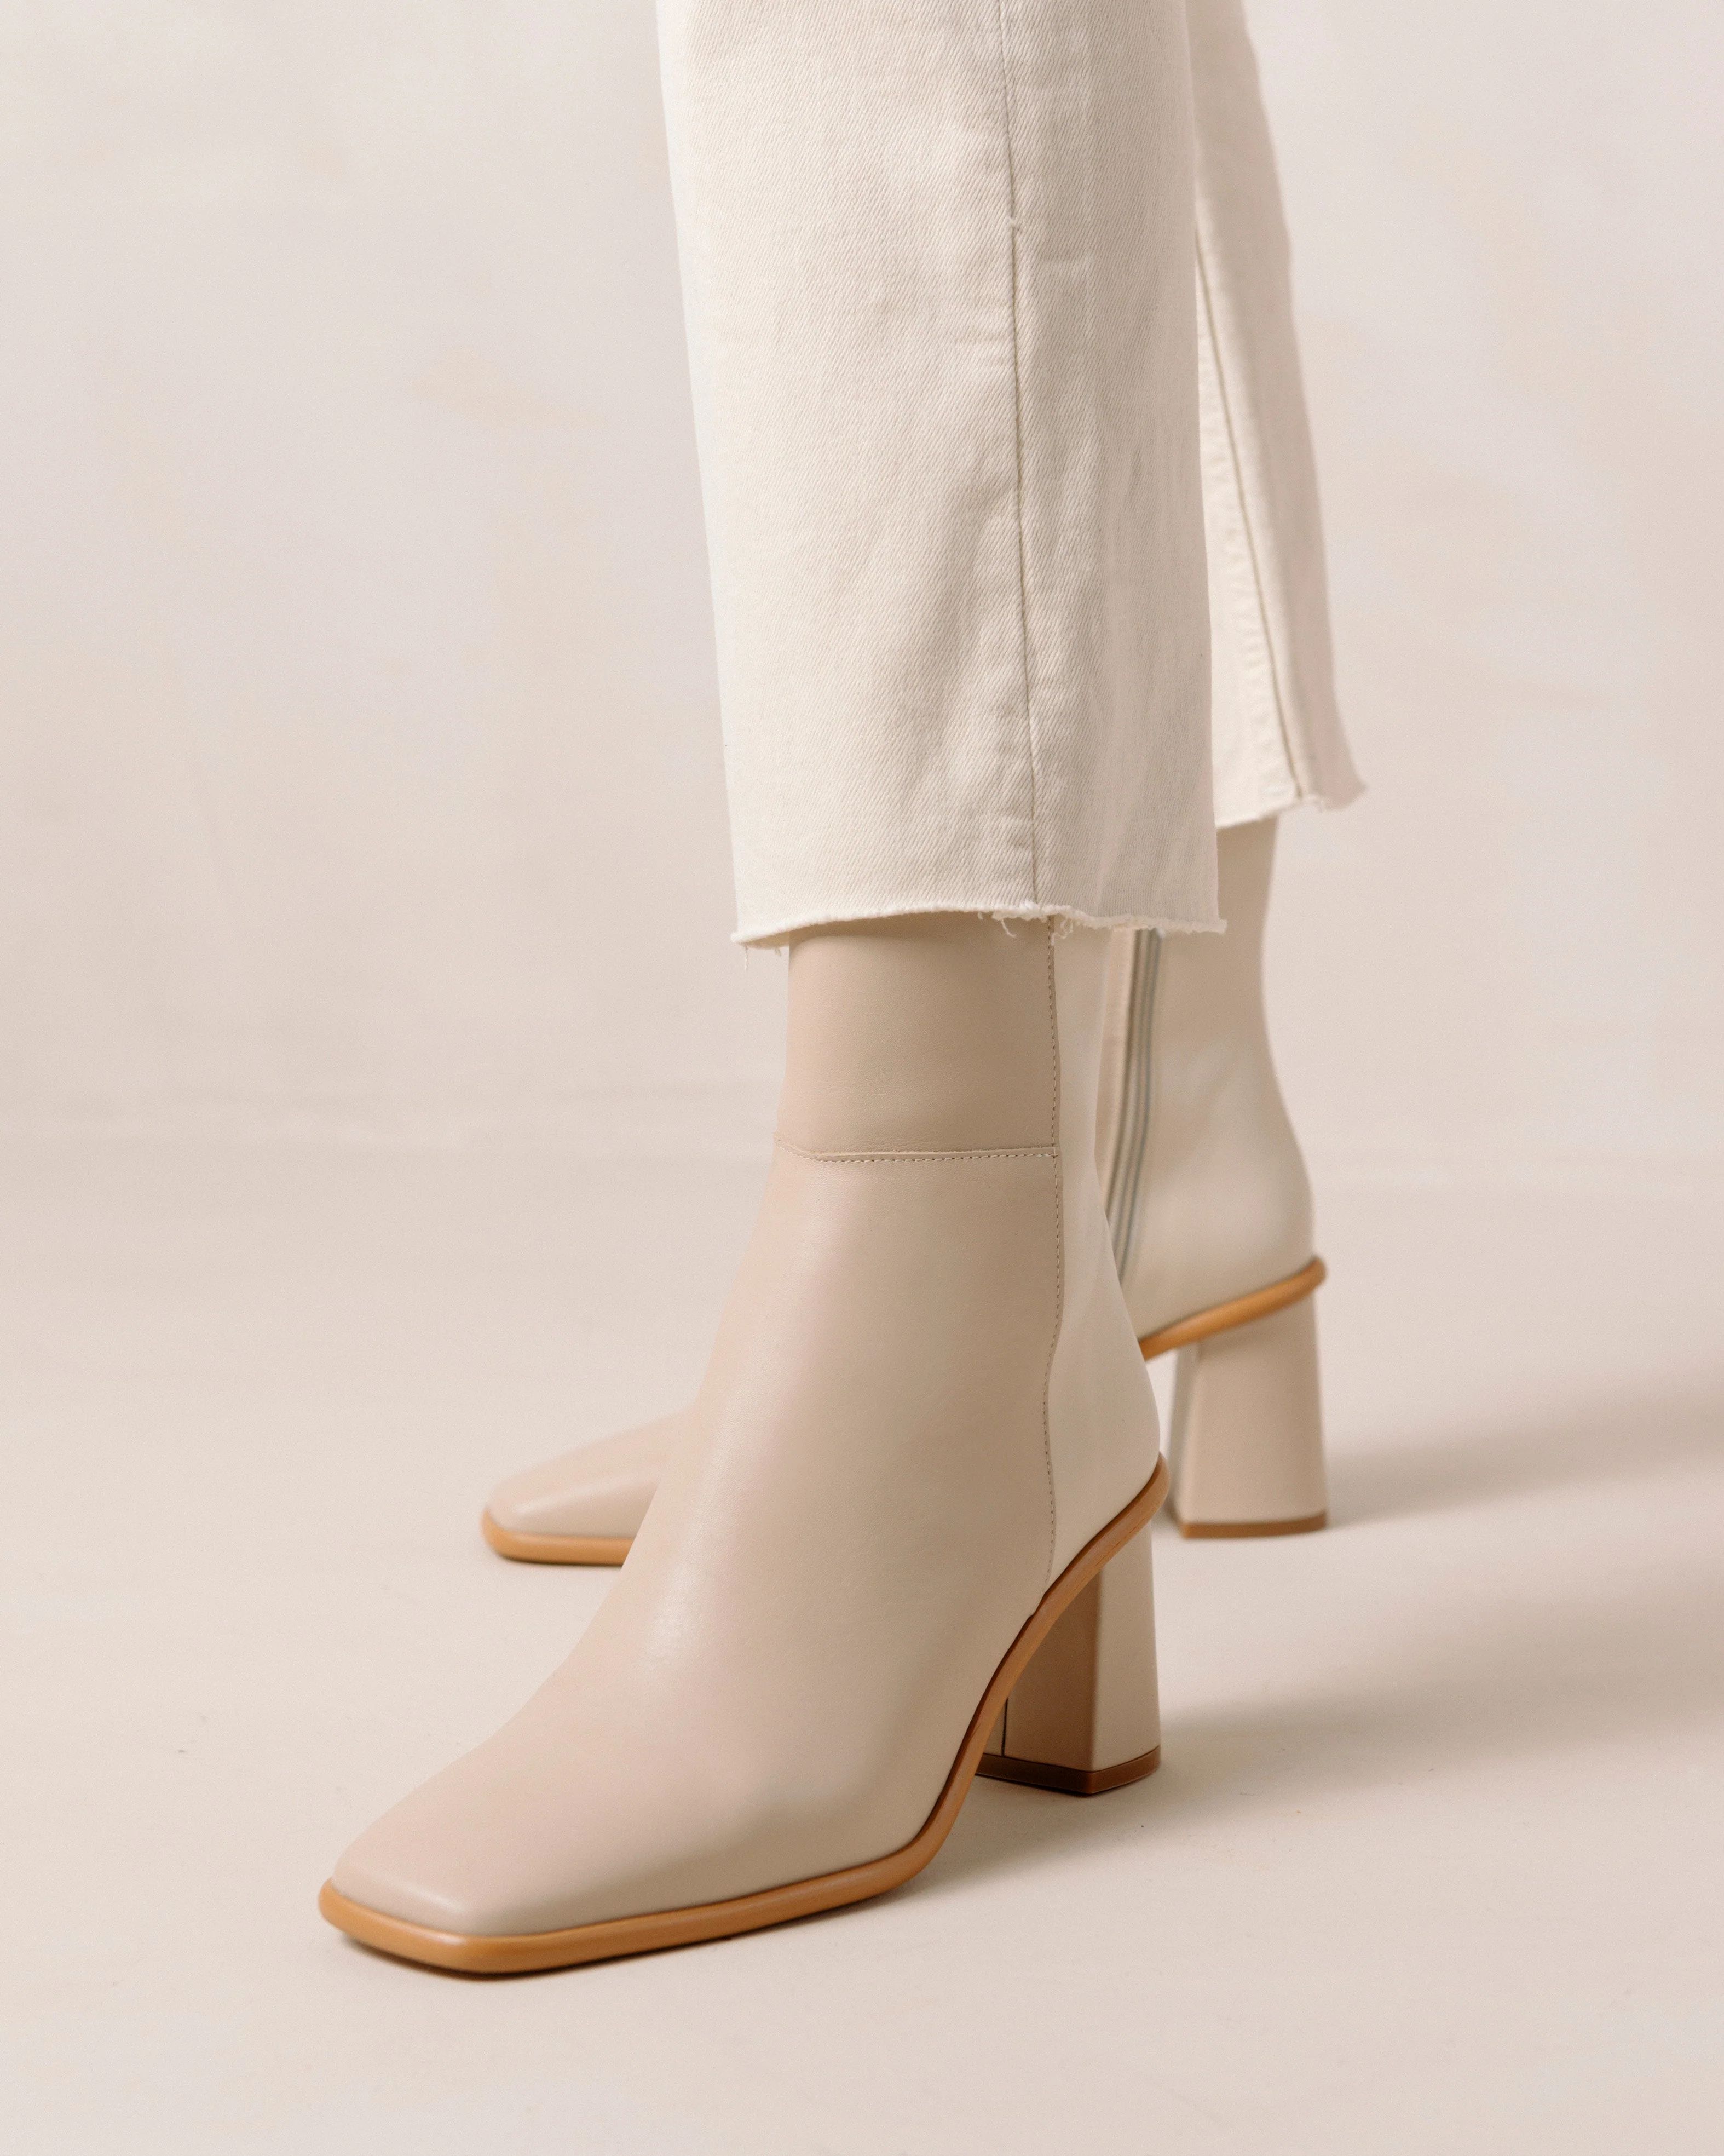 West - Cream and Beige Leather Boots | Alohas FR